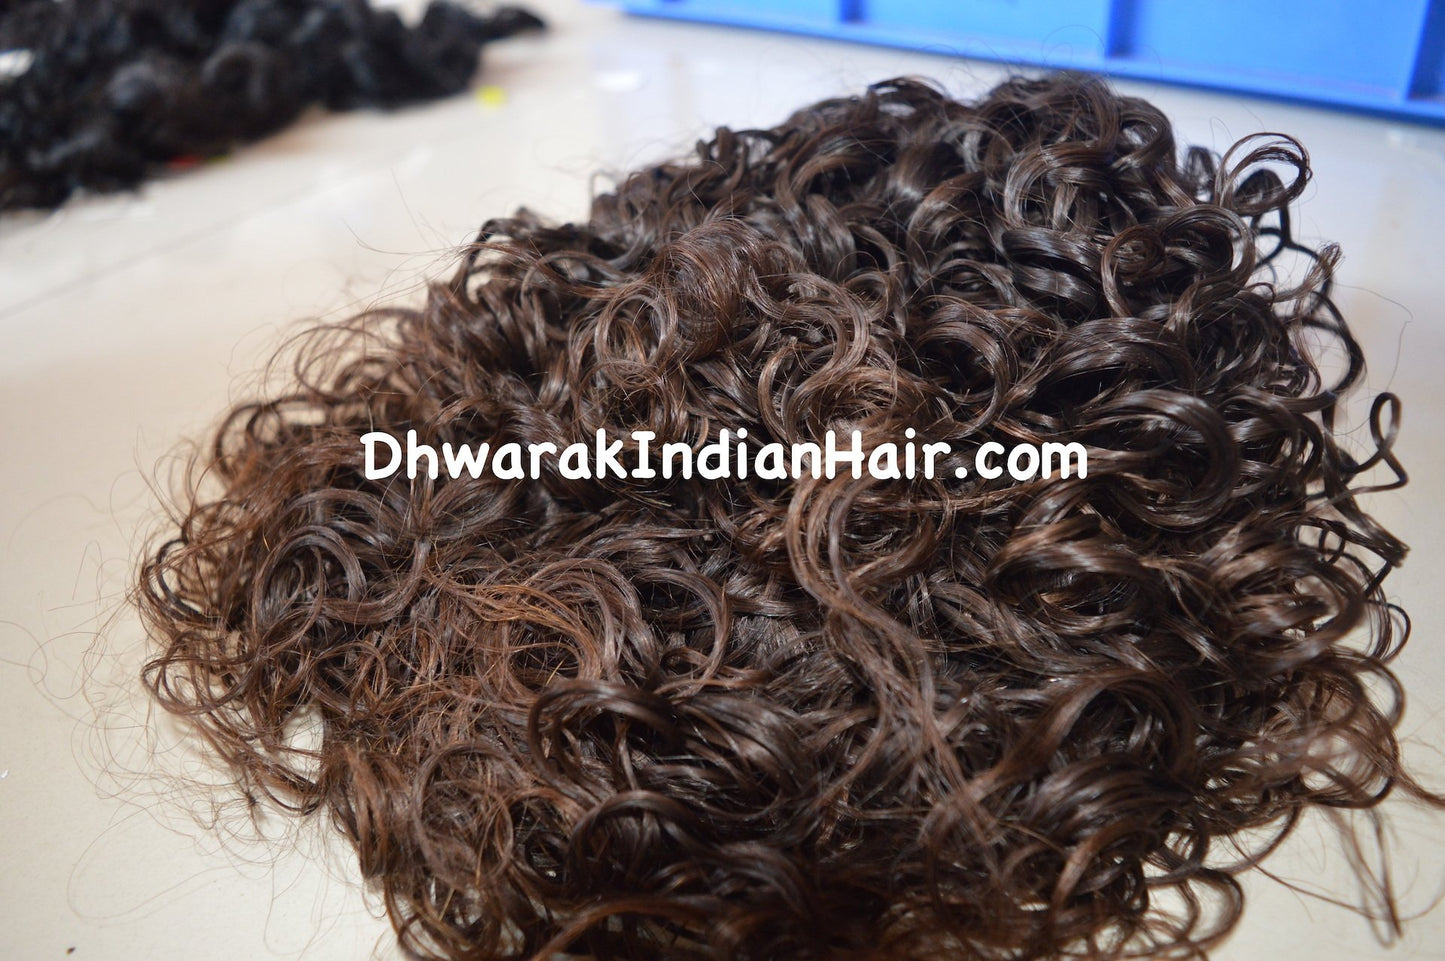 Raw Indian curly hair vendors - Wholesale Indian Hair Supplier and Distribution in United States 